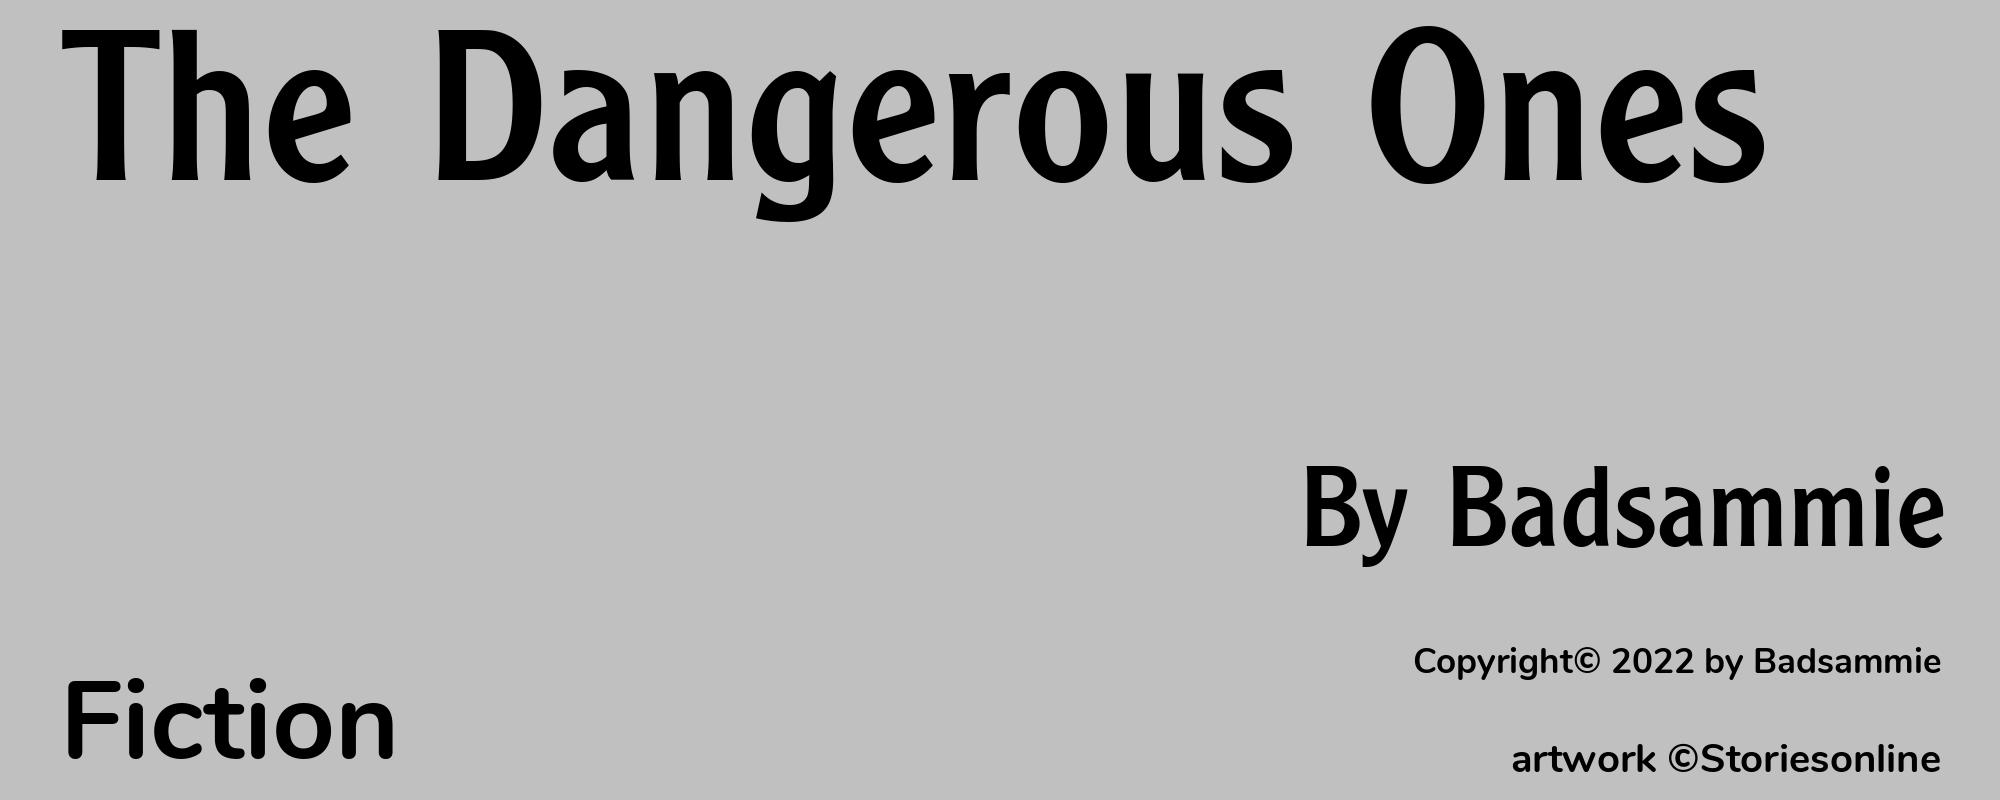 The Dangerous Ones - Cover